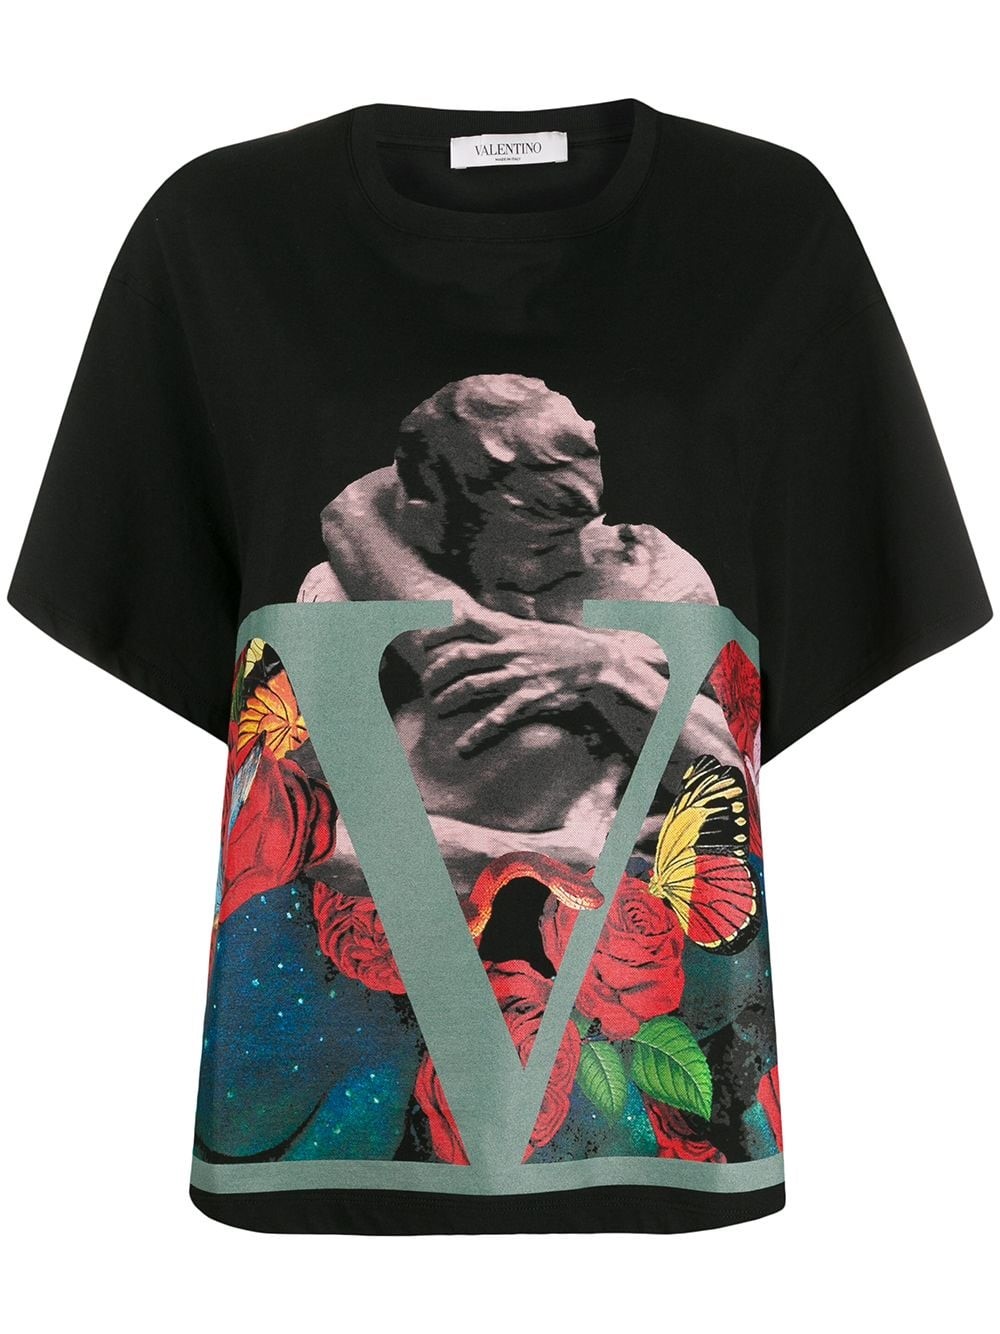 valentino UNDERCOVER T-SHIRT available on montiboutique.com - 31354